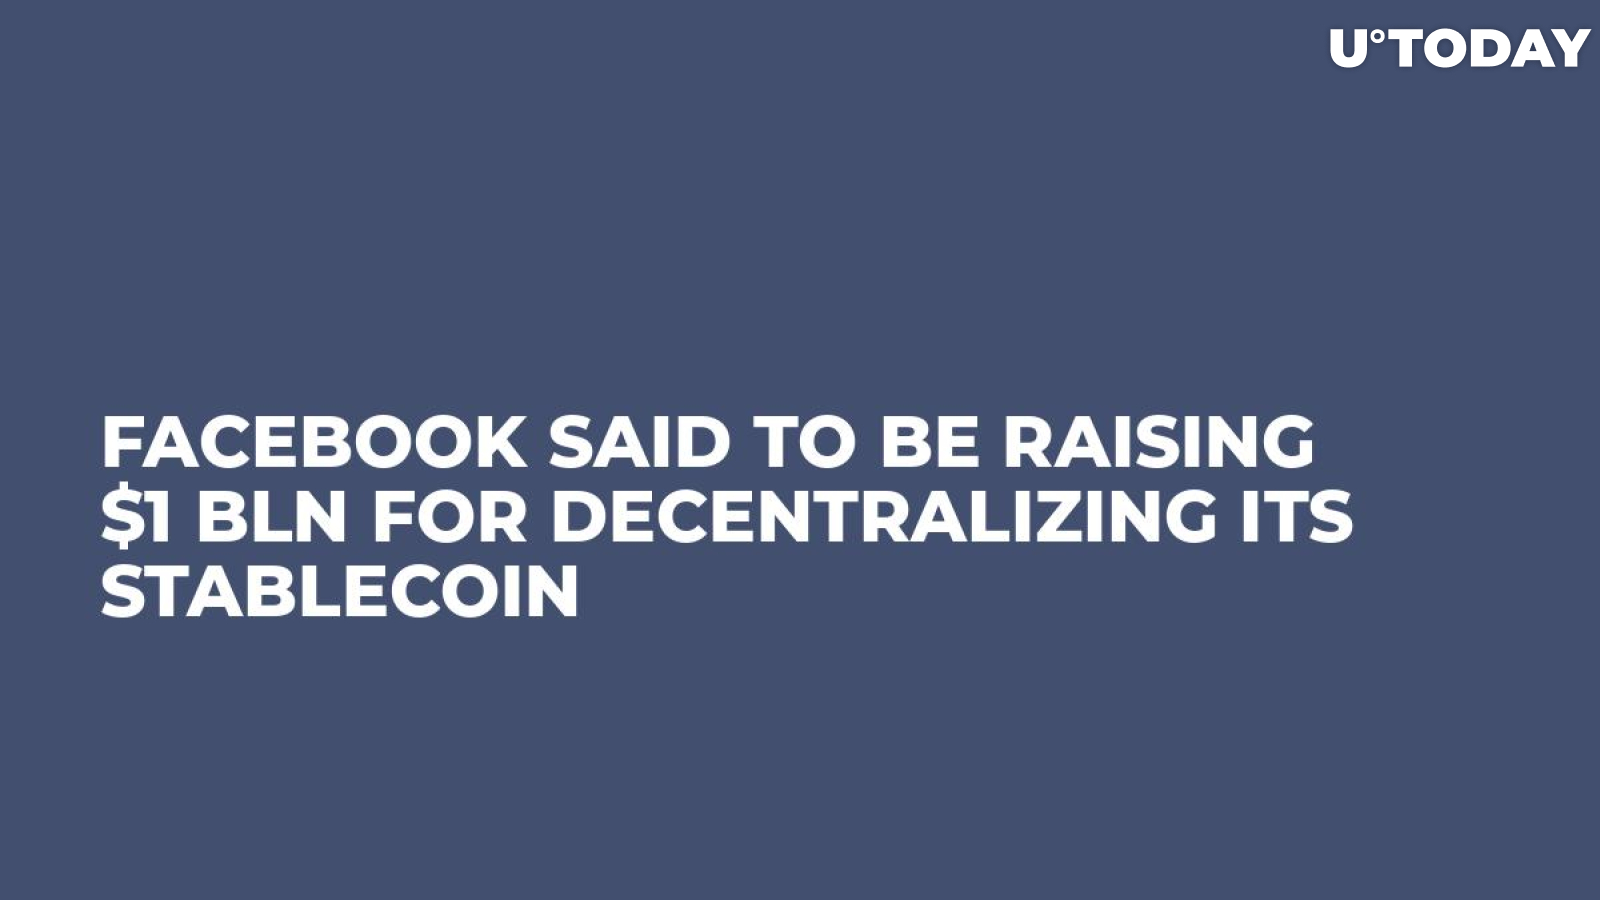 Facebook Said to Be Raising $1 Bln for Decentralizing Its Stablecoin